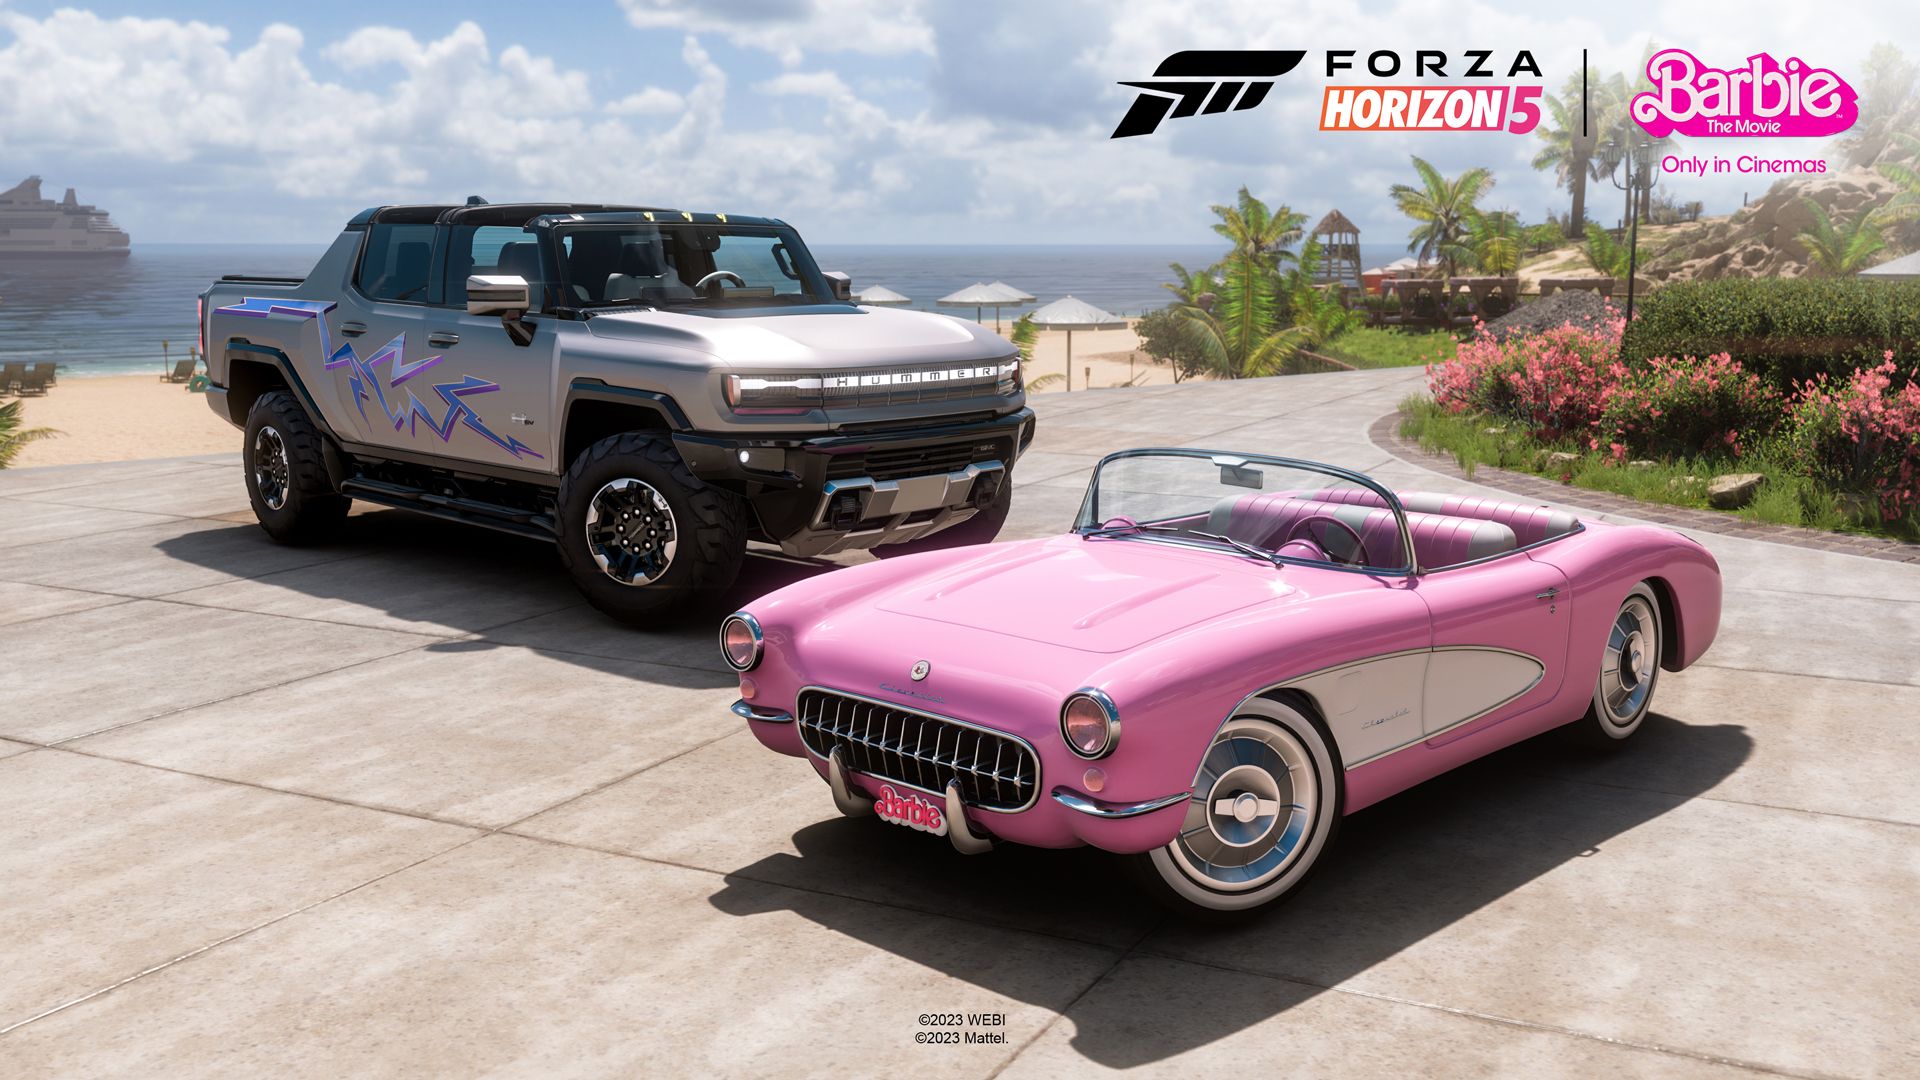 Forza Horizon 5 Adds 2 Free Vehicles Inspired by New Barbie Film